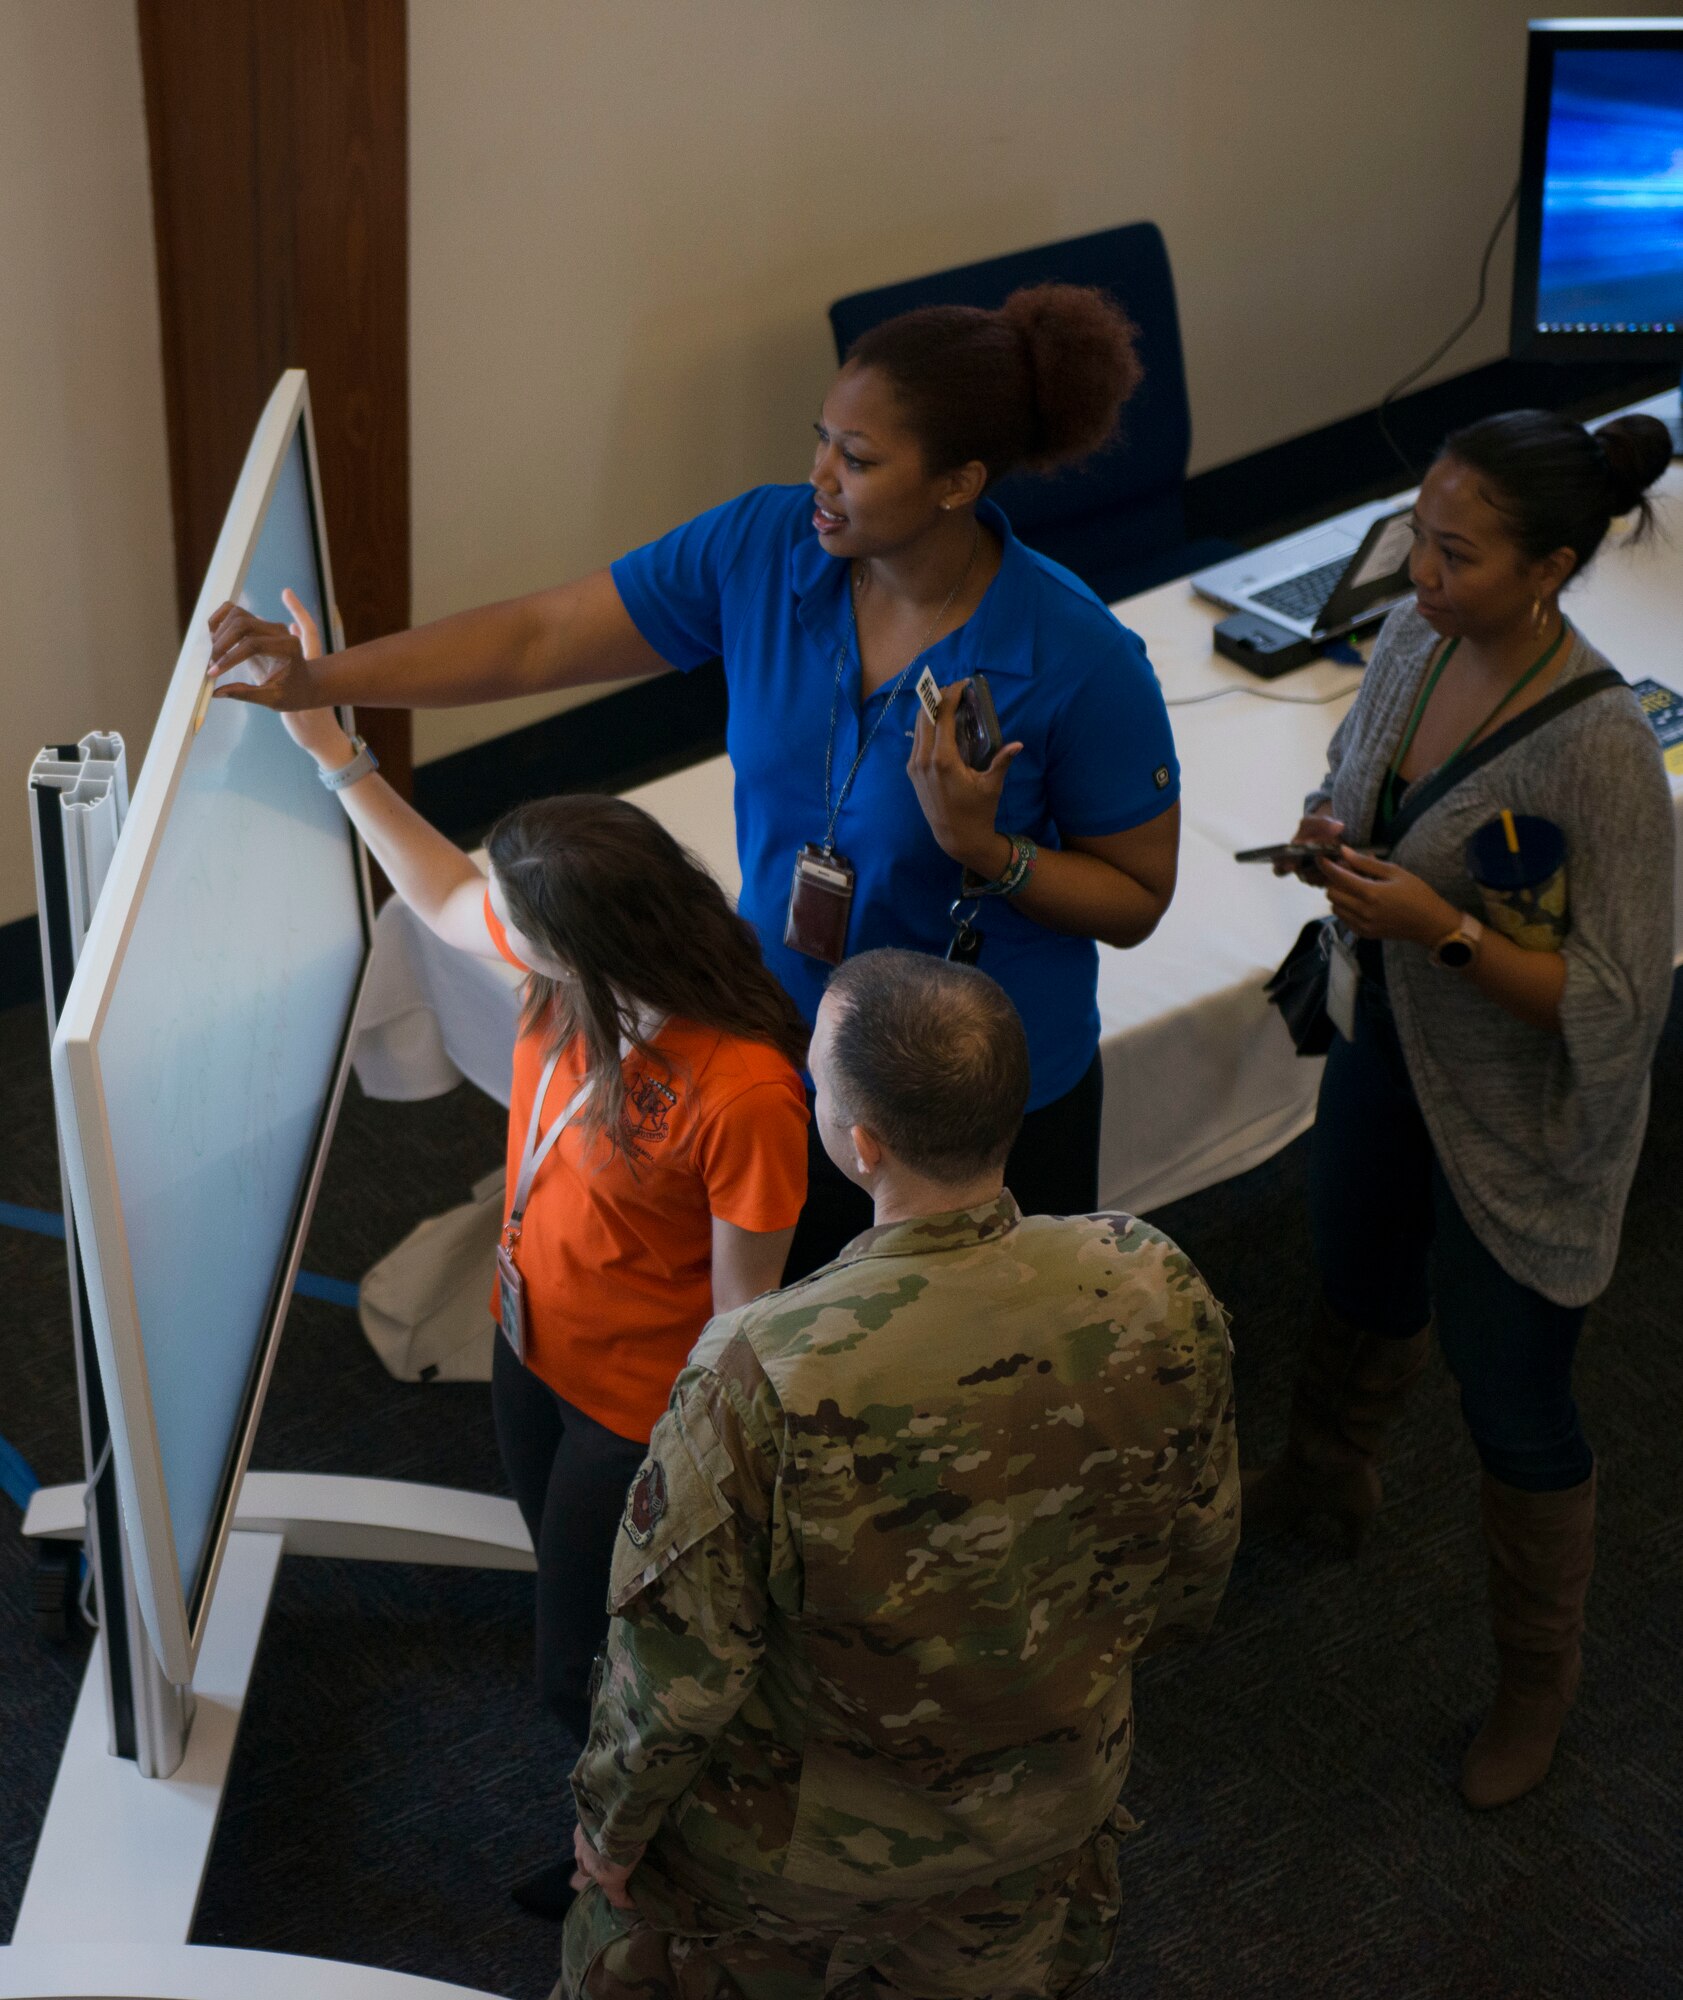 A photograph of people gathered around an electronic whiteboard, smiling.